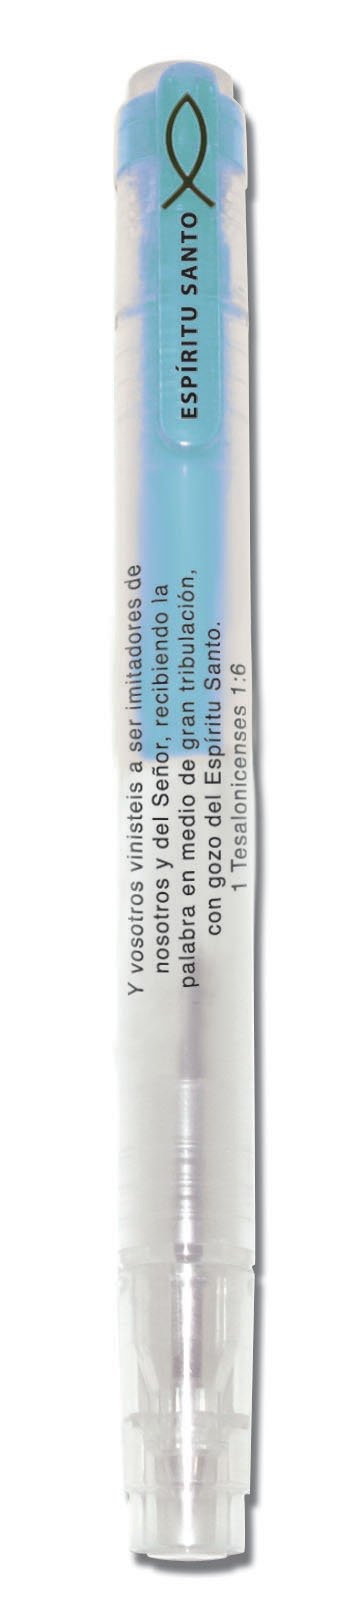 Divinity Boutique Spanish: Bible Highlighter with Scripture